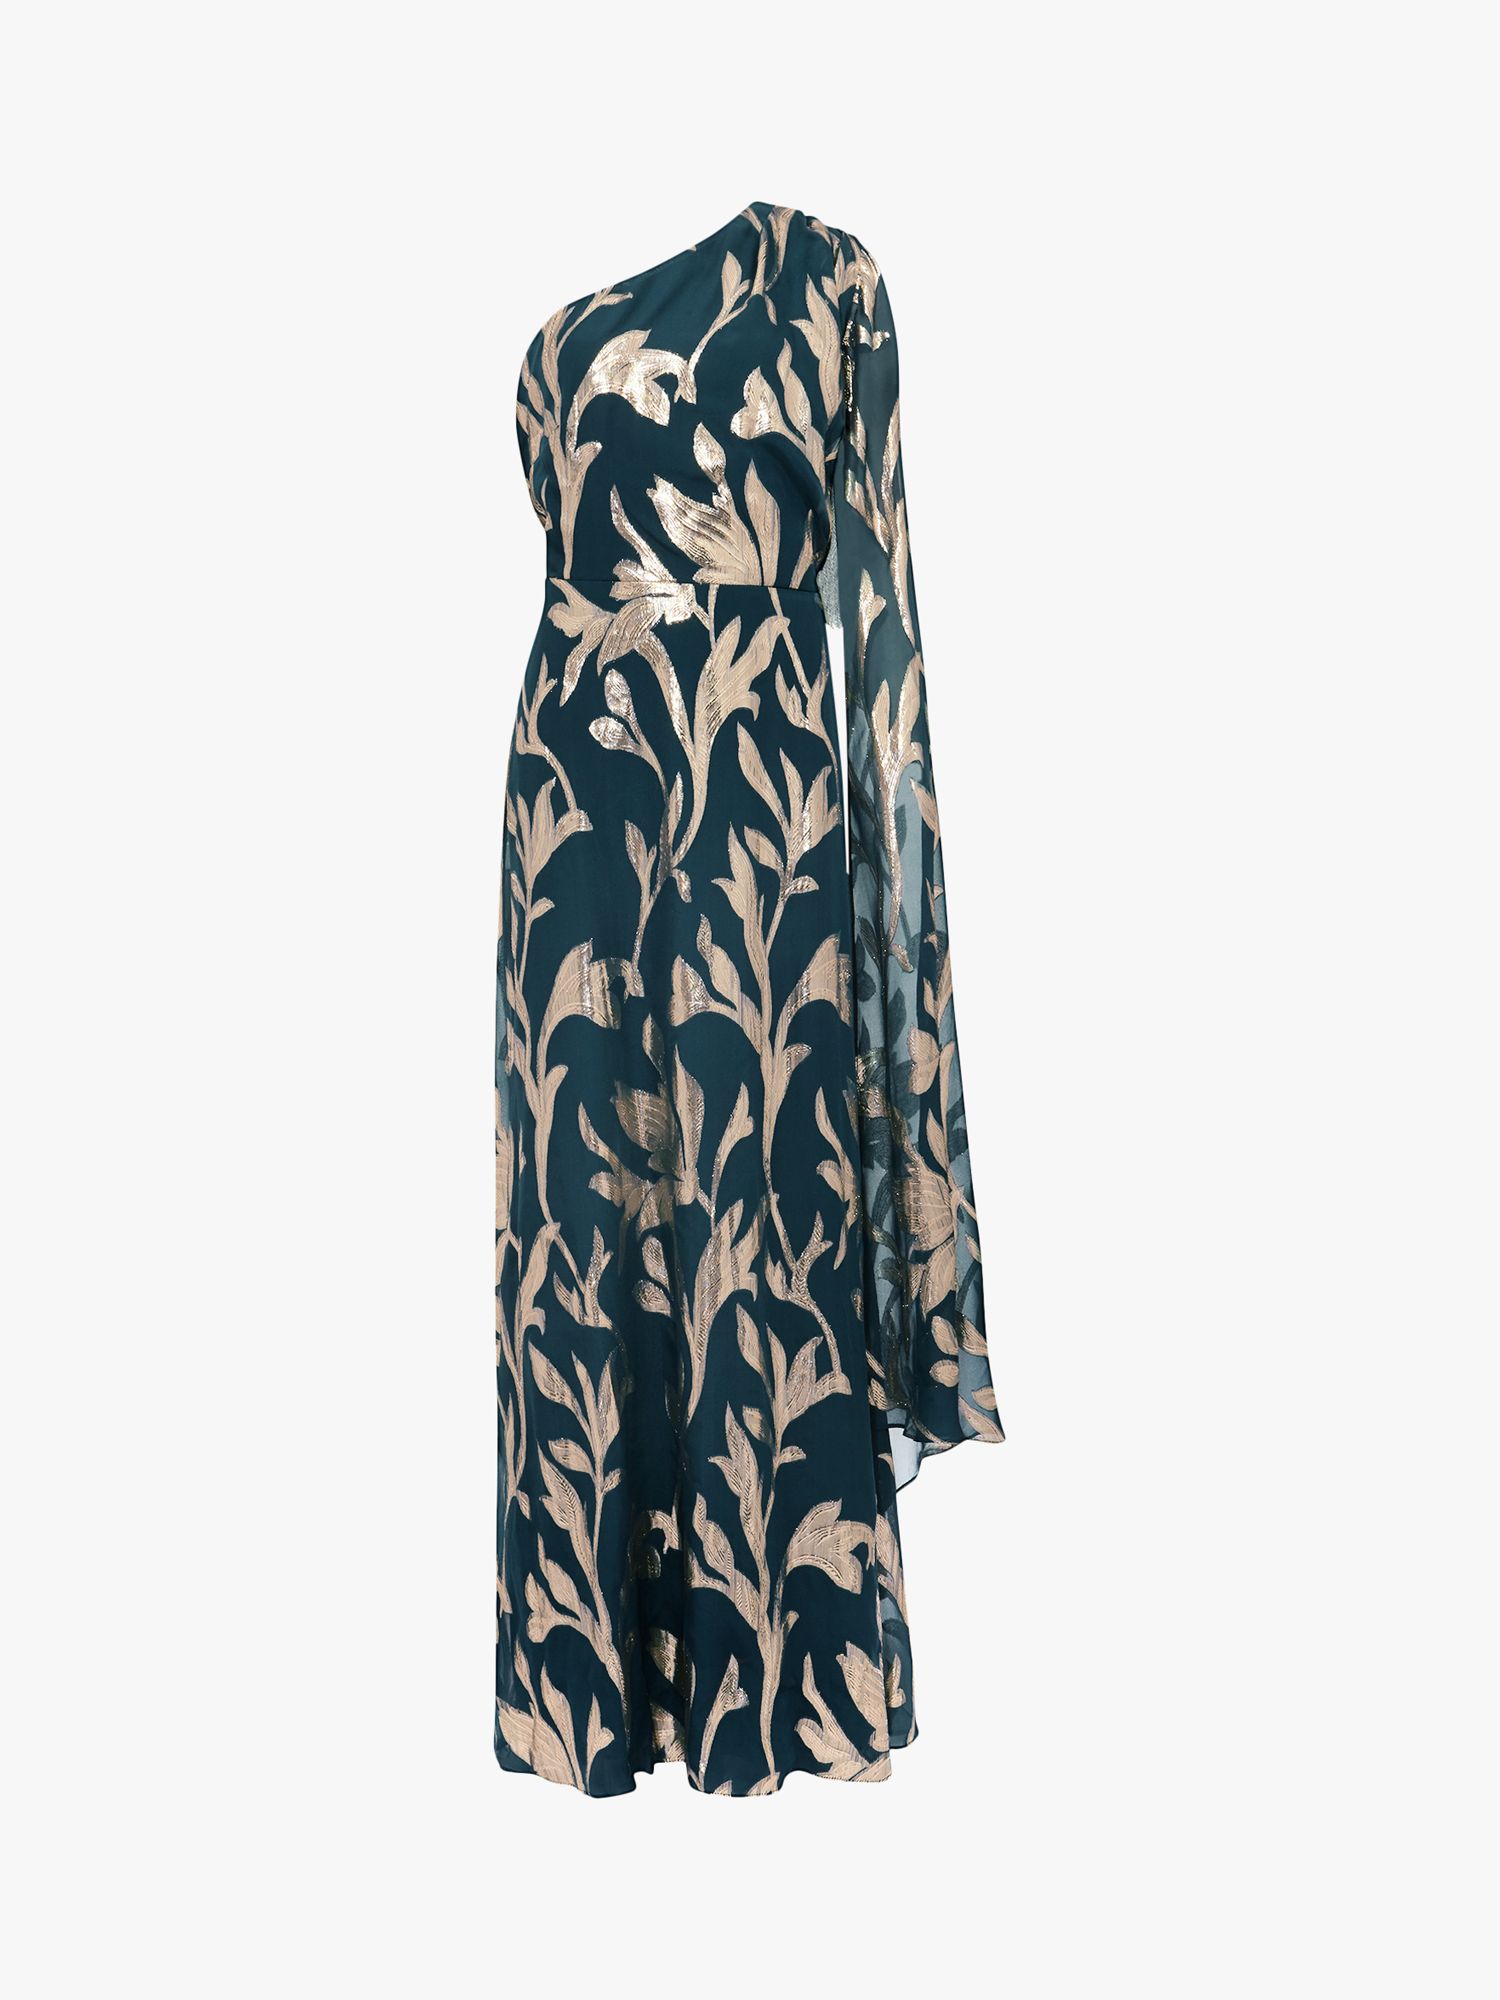 Phase Eight Collection 8 Kiara Drape Floral Maxi Dress, Forest/Gold, 18